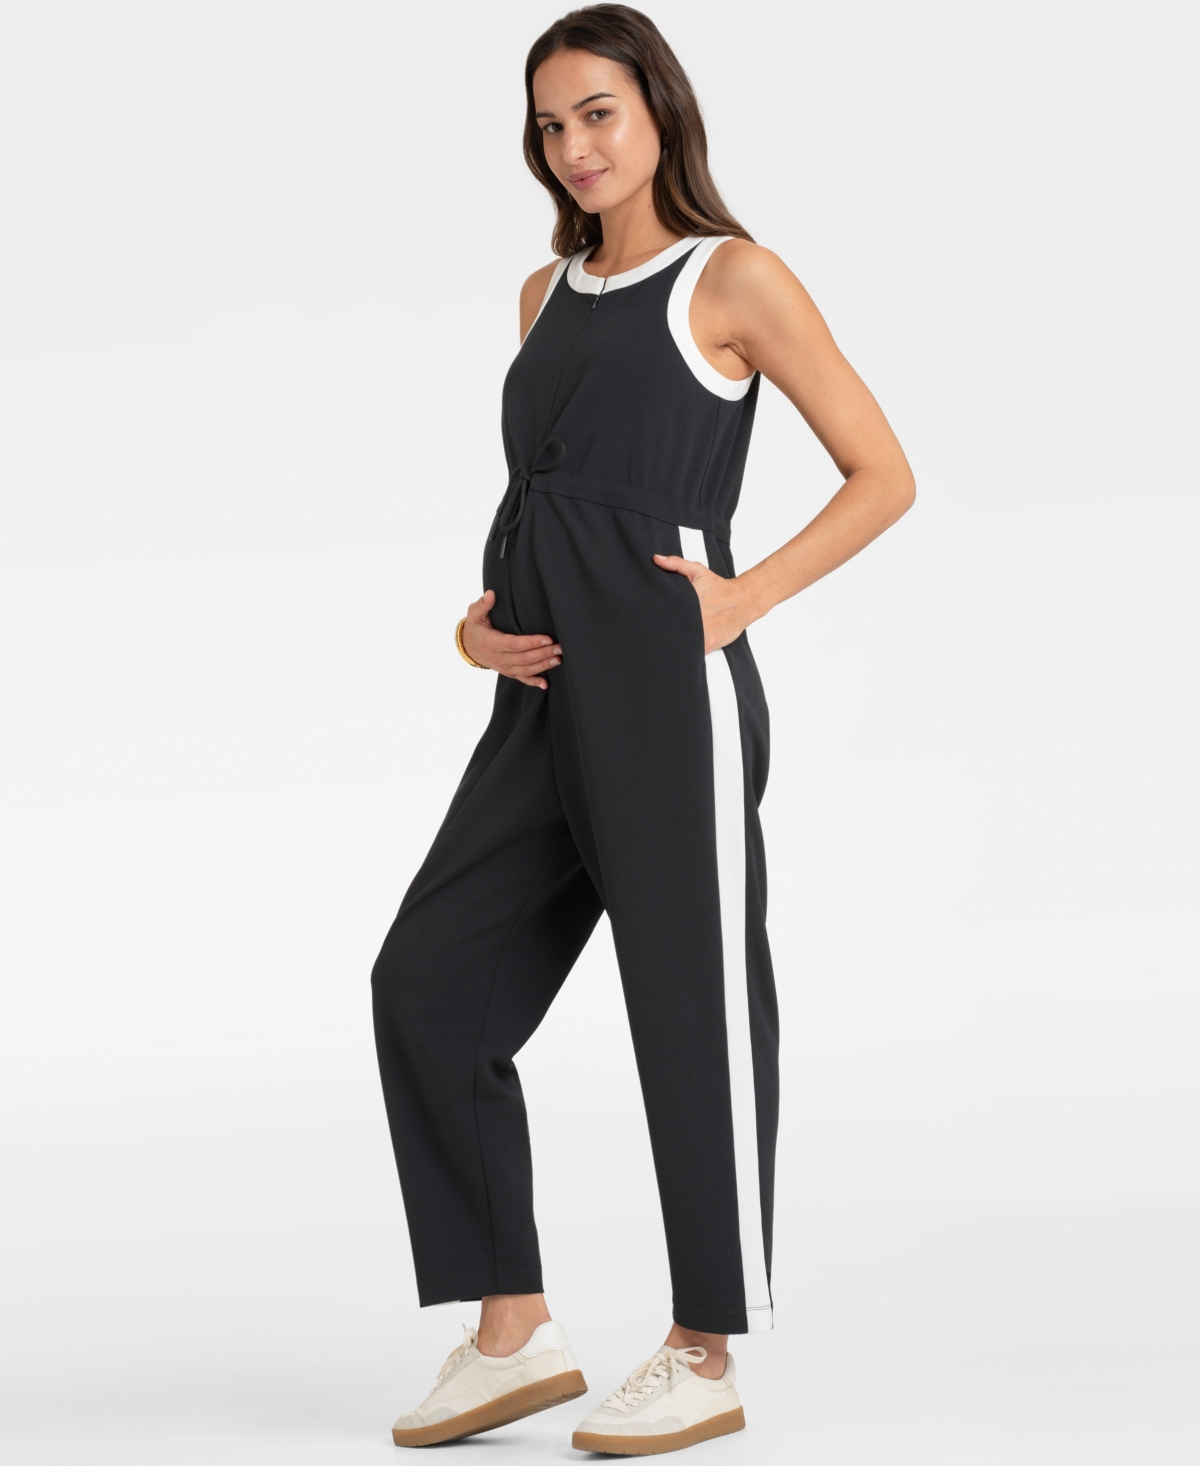 Seraphine Women's Sleeveless Maternity And Nursing Jumpsuit In Oxford